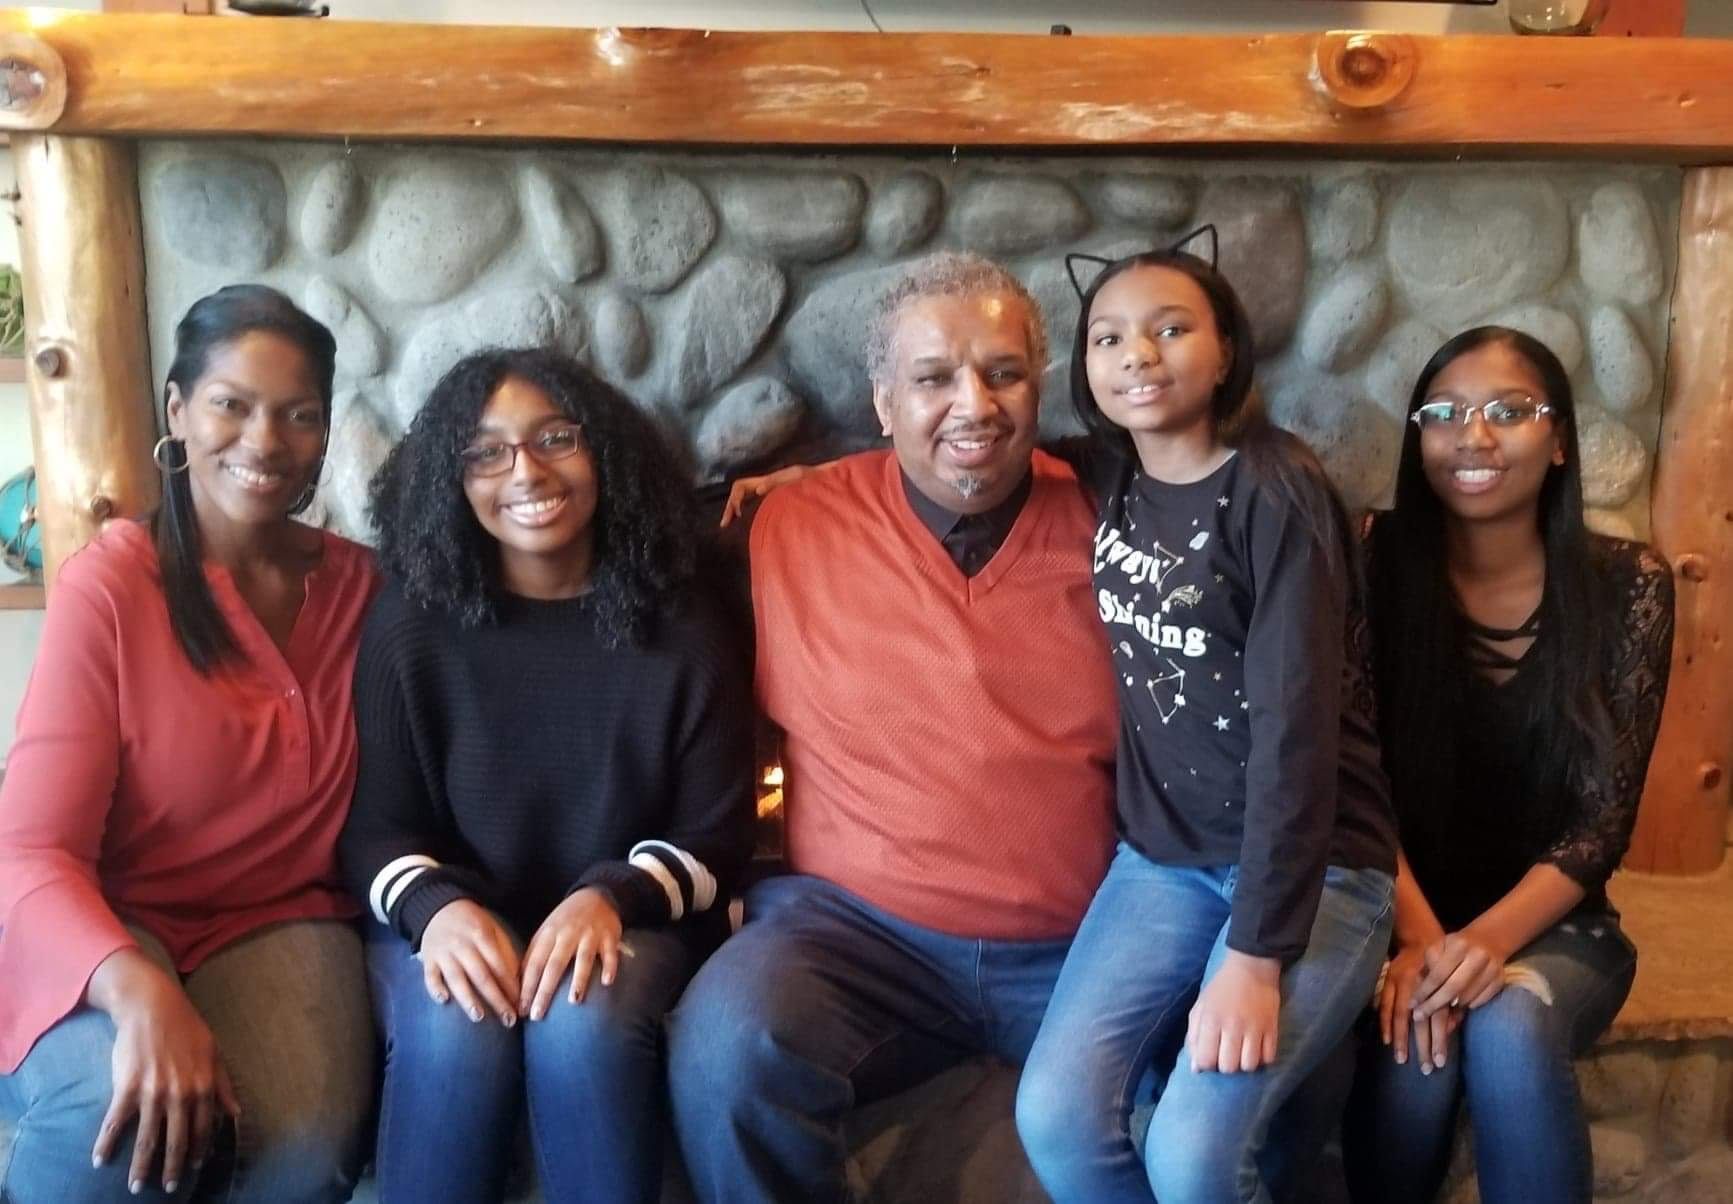 Michael with his wife and three daughters.